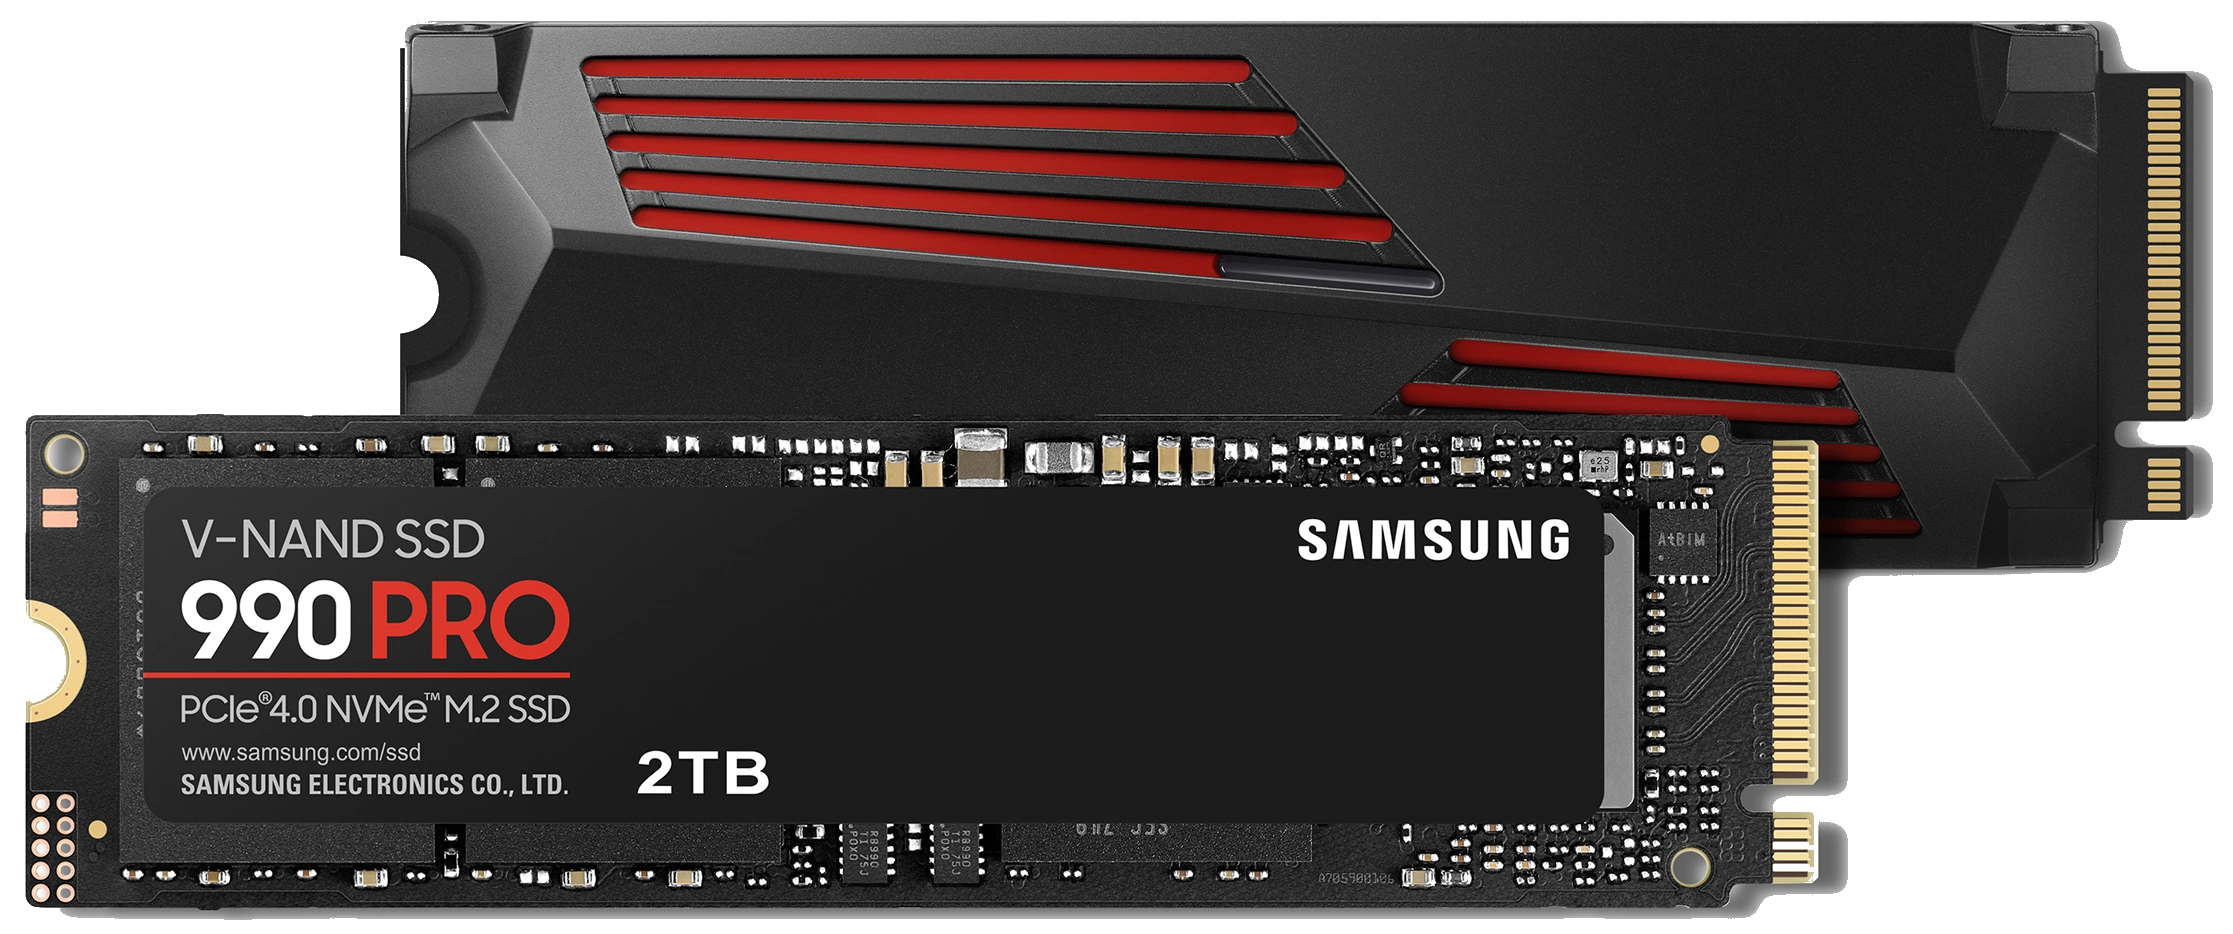 Samsung's 990 Pro SSD is crazy fast and on sale for just $75